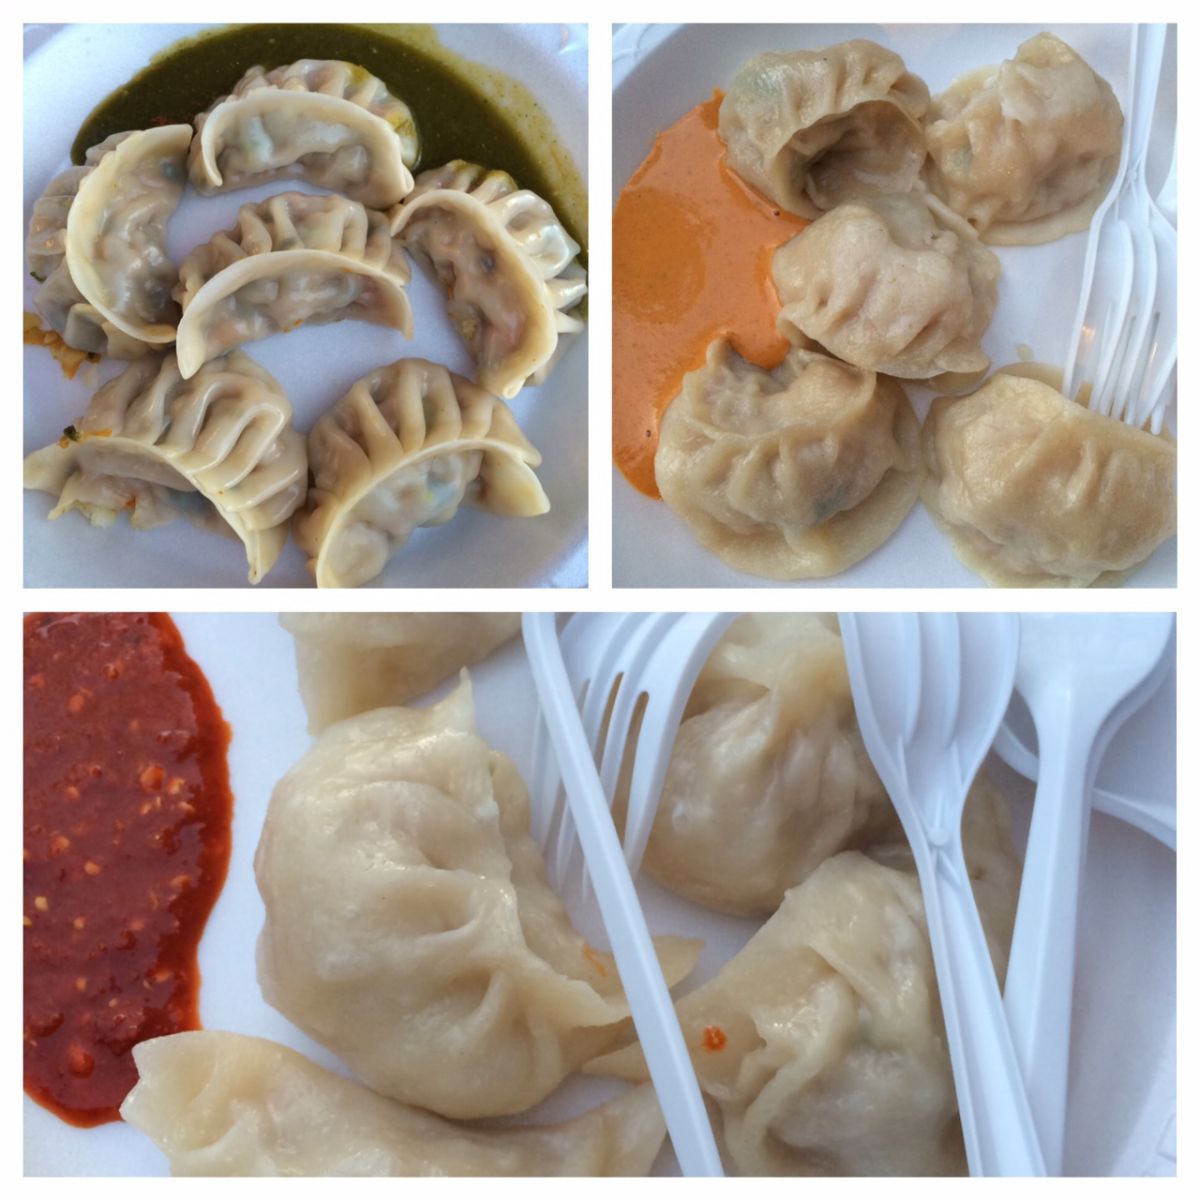 Selection of momos from Jackson Heights, Queens